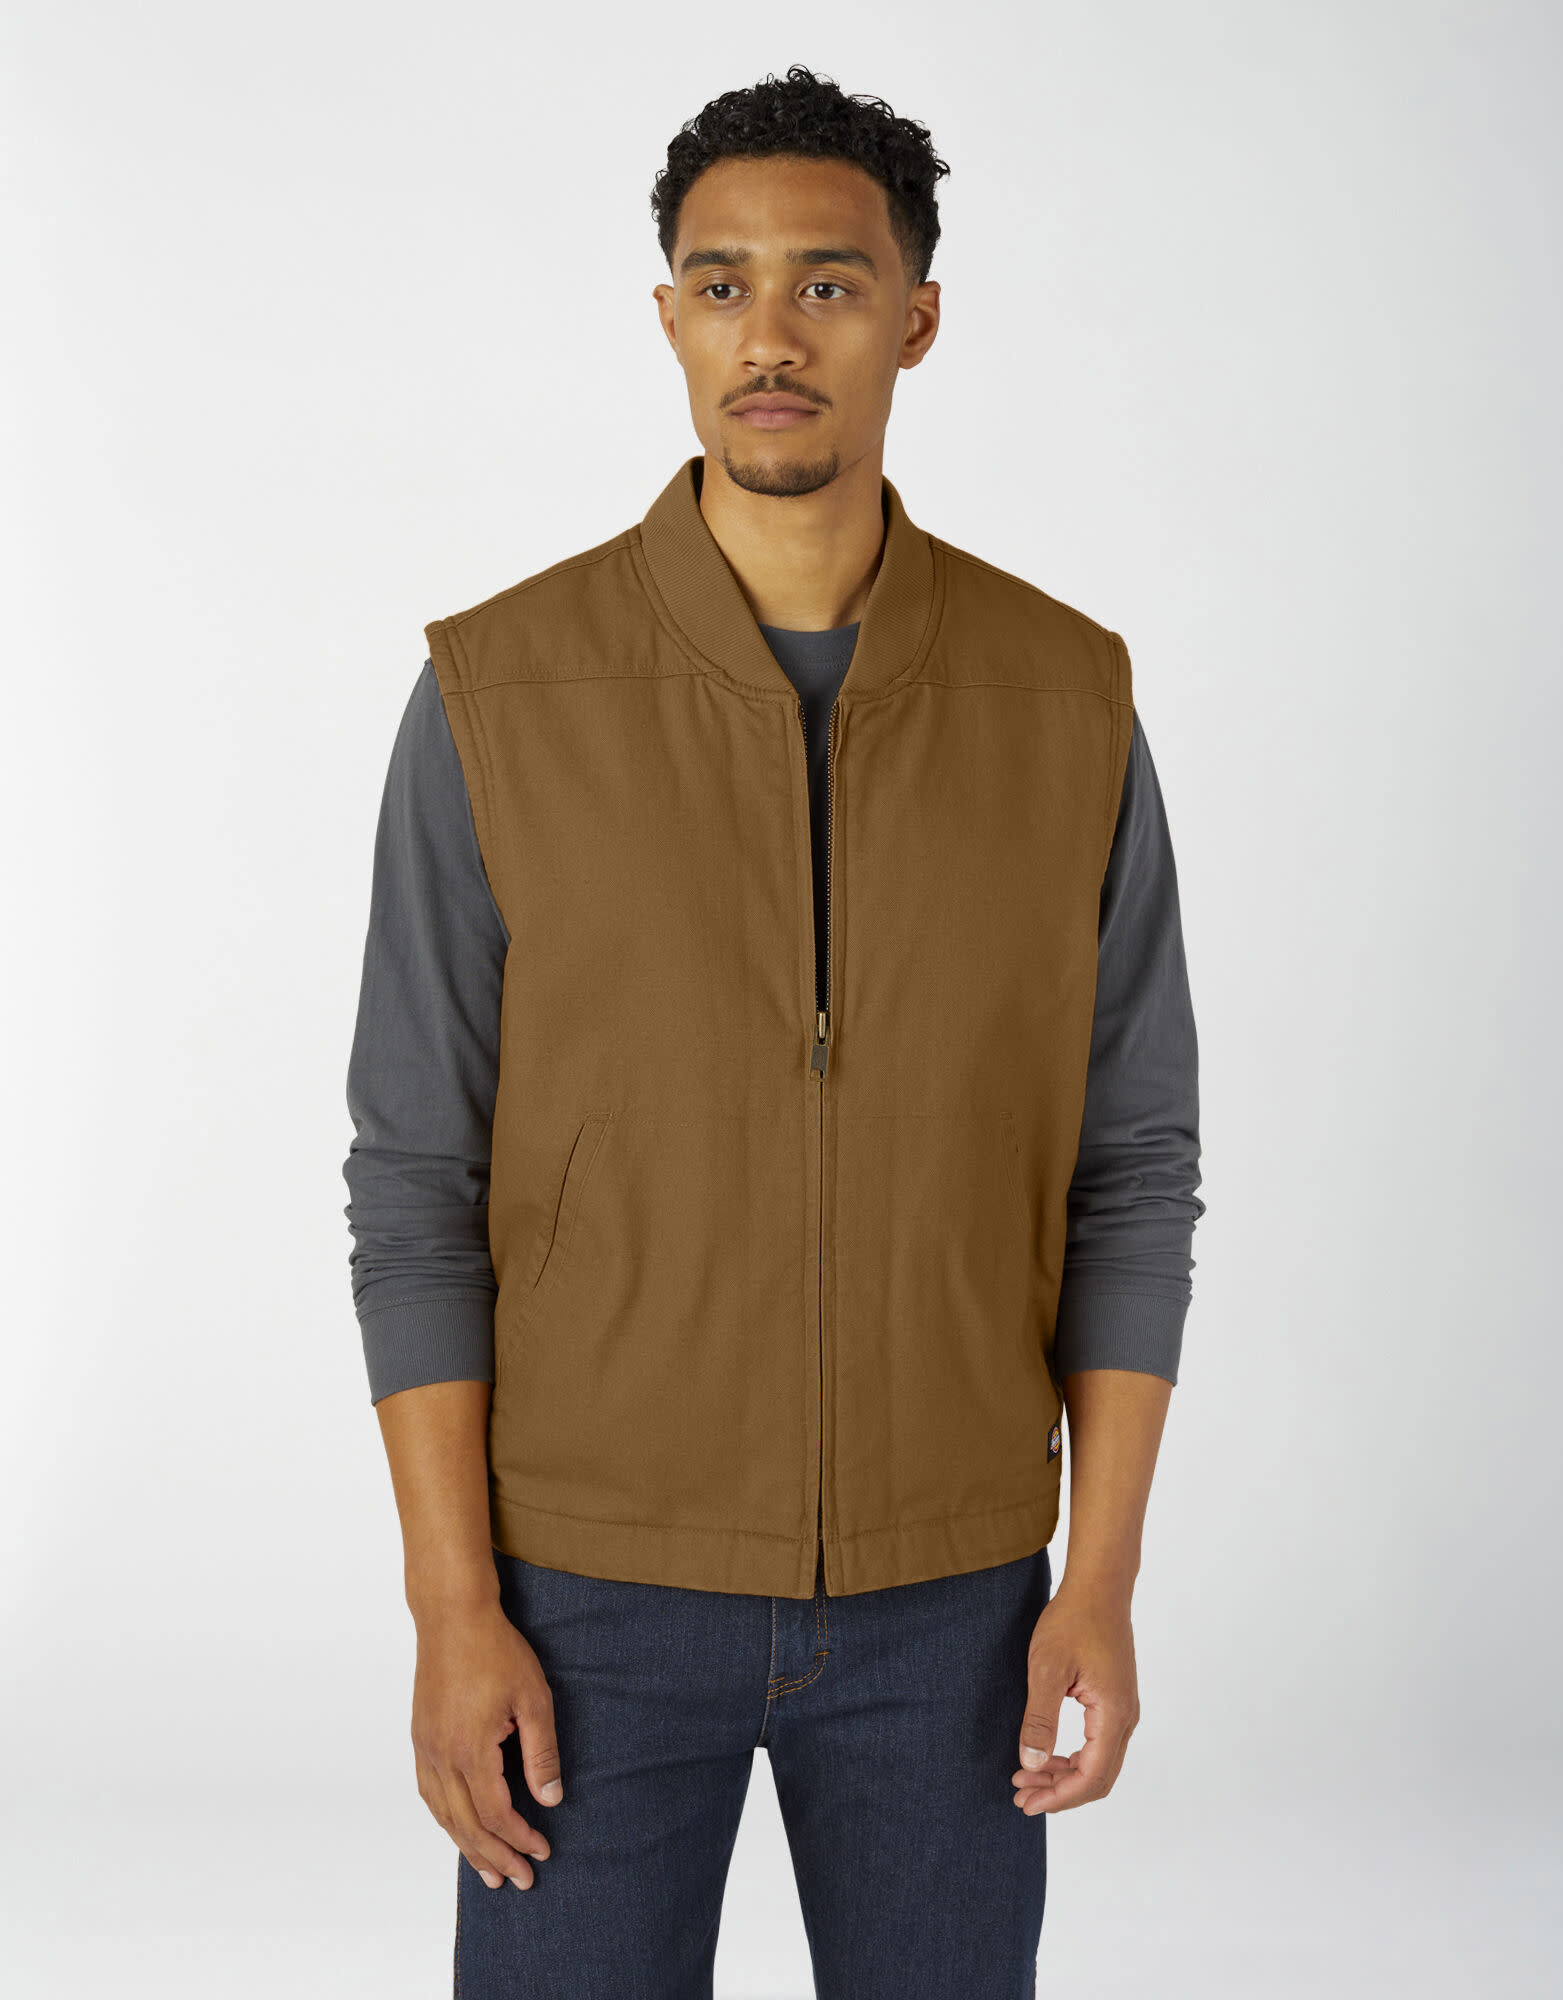 kapre Logisk Ooze DICKIES SHERPA LINED DUCK VEST - Boaz on The Square Graham Texas